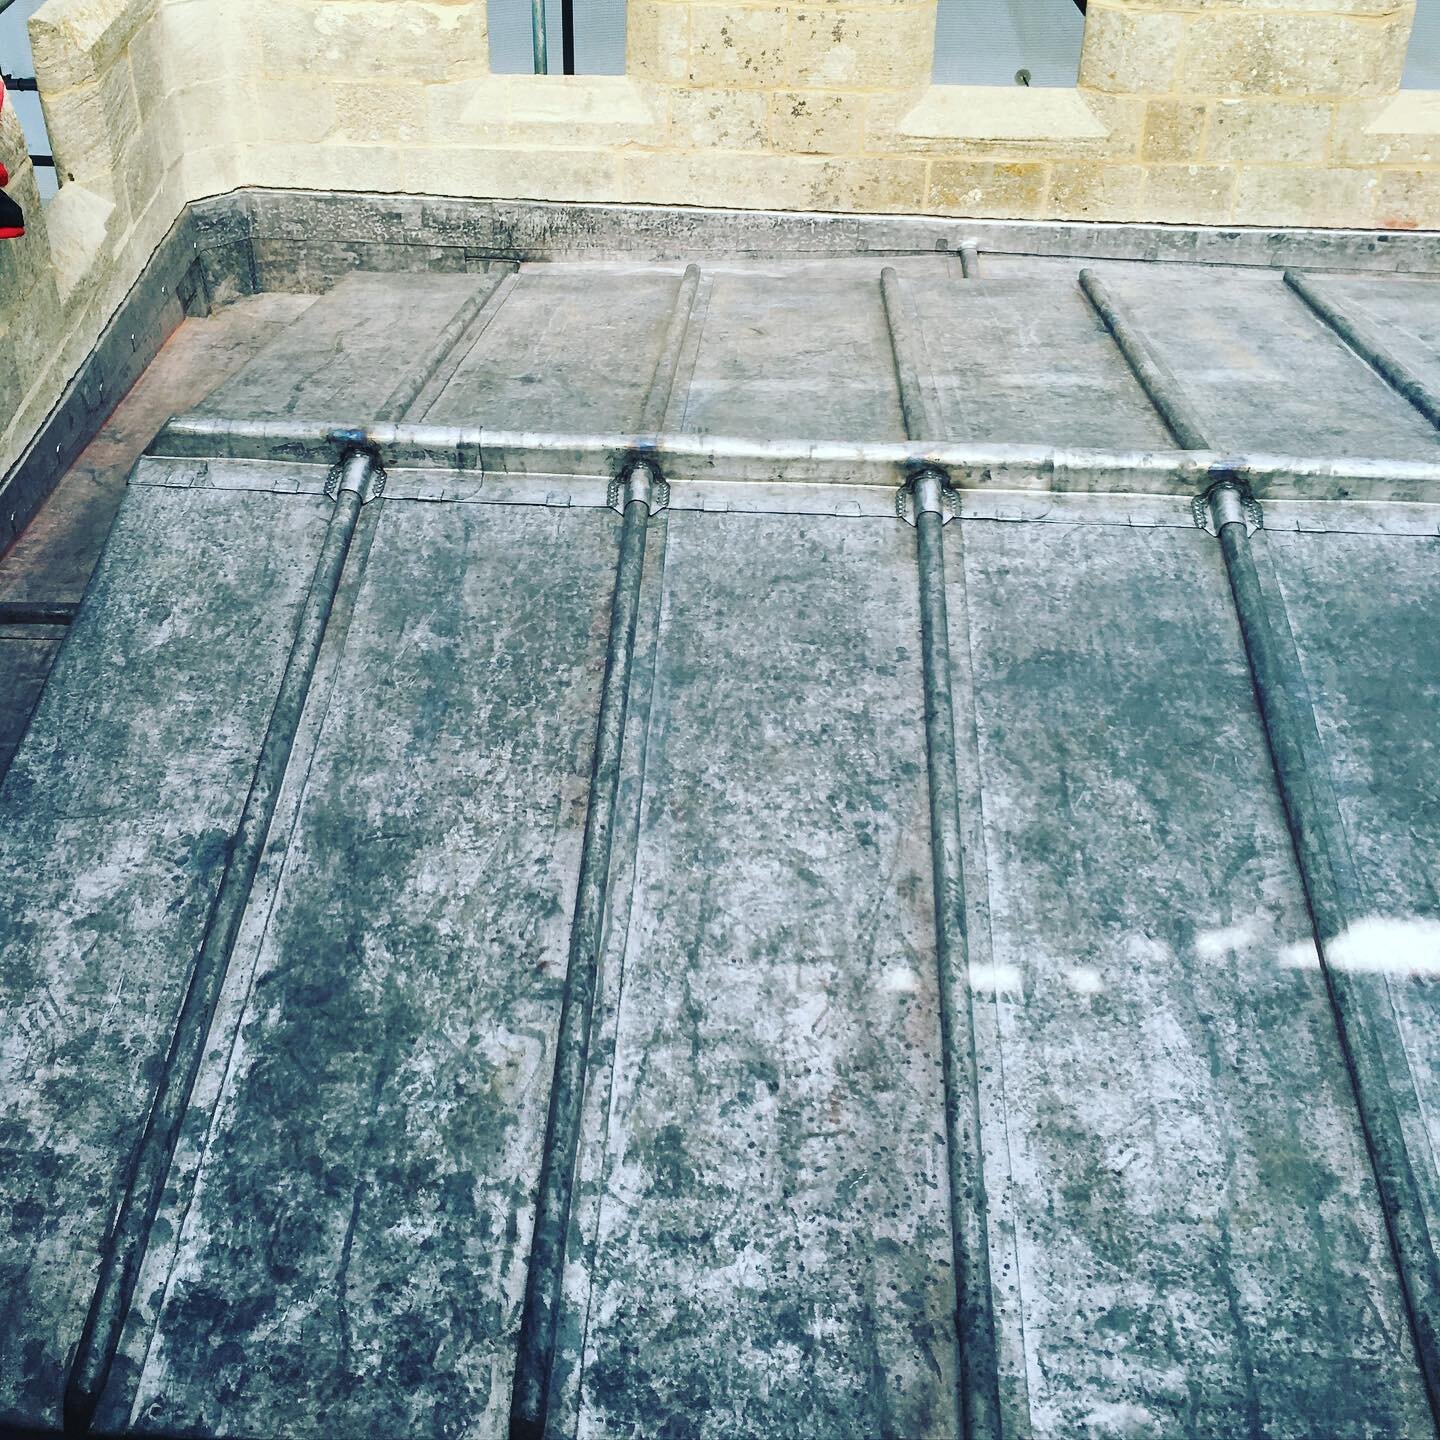 New code 7 sandcast bays that we completed on top of this church tower.
📞07983131947 #leadroofing  #leadroofs  #leadroofingspecialists  #leadwork #leadwelding #leadroofer  #leadroofingdetail #leadbossing #lrw_leadroofing www.lrwleadroofing.com #chur